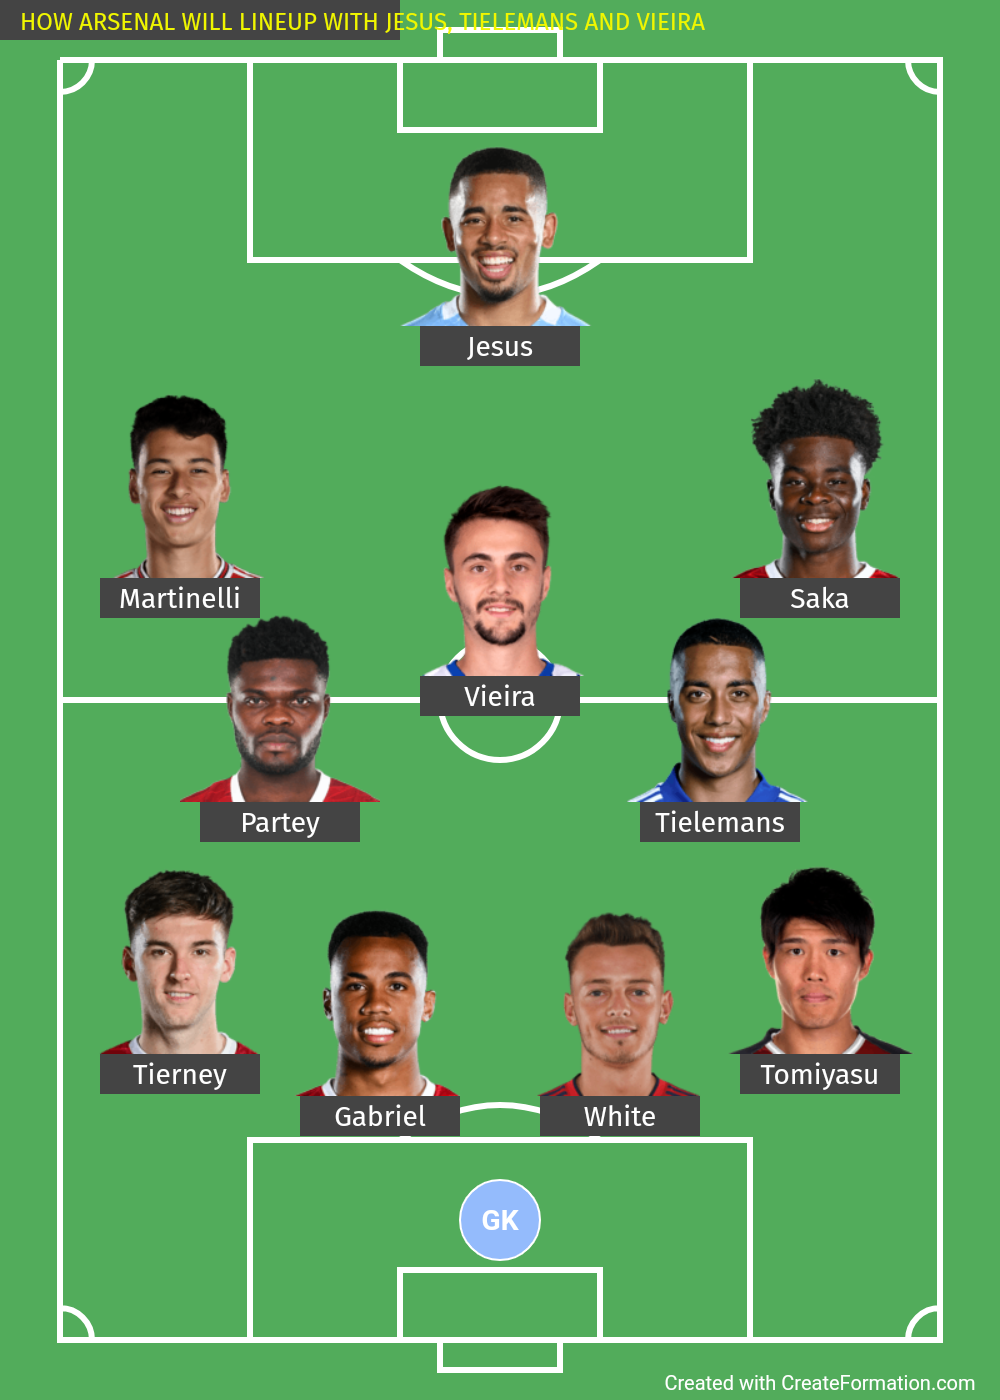 HOW ARSENAL WILL LINEUP WITH JESUS, TIELEMANS AND VIEIRA_